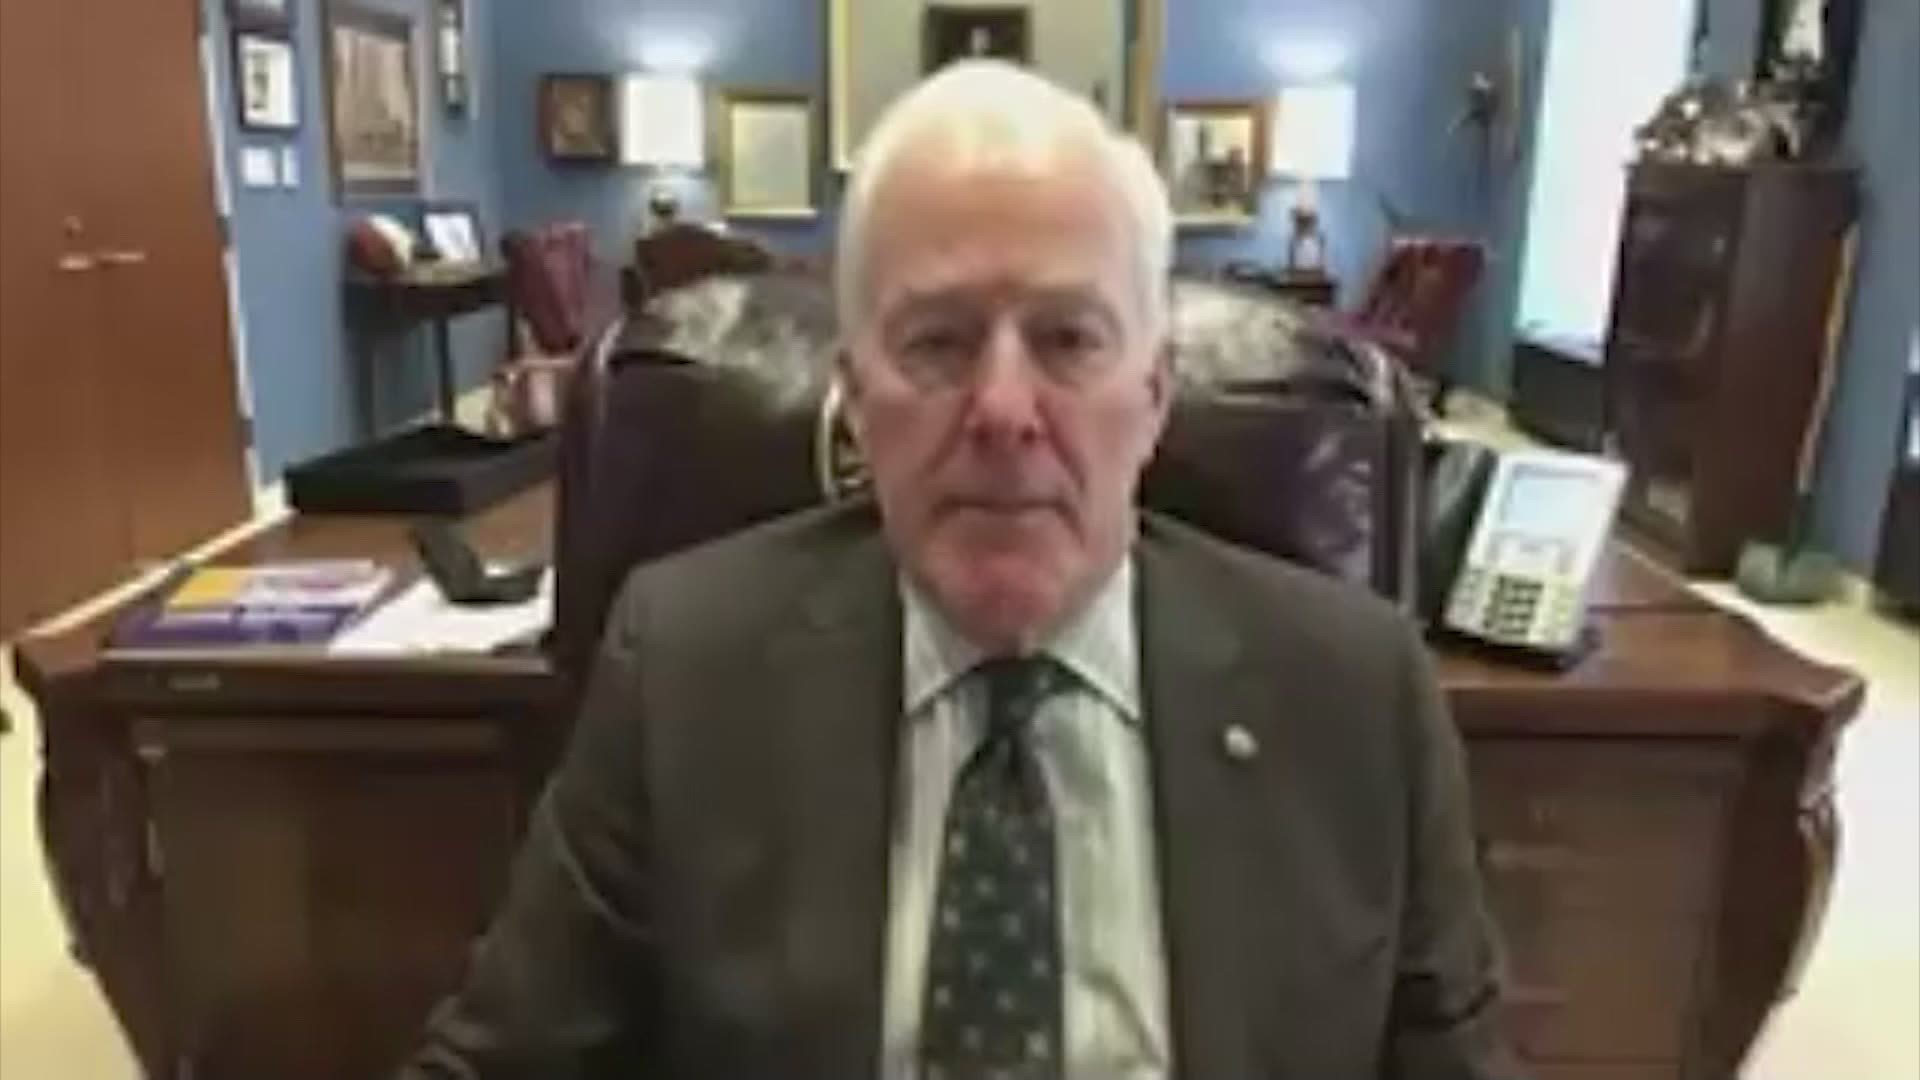 Sen. Cornyn says he'll reserve judgment in Trump's impeachment trial, which begins Feb. 8.